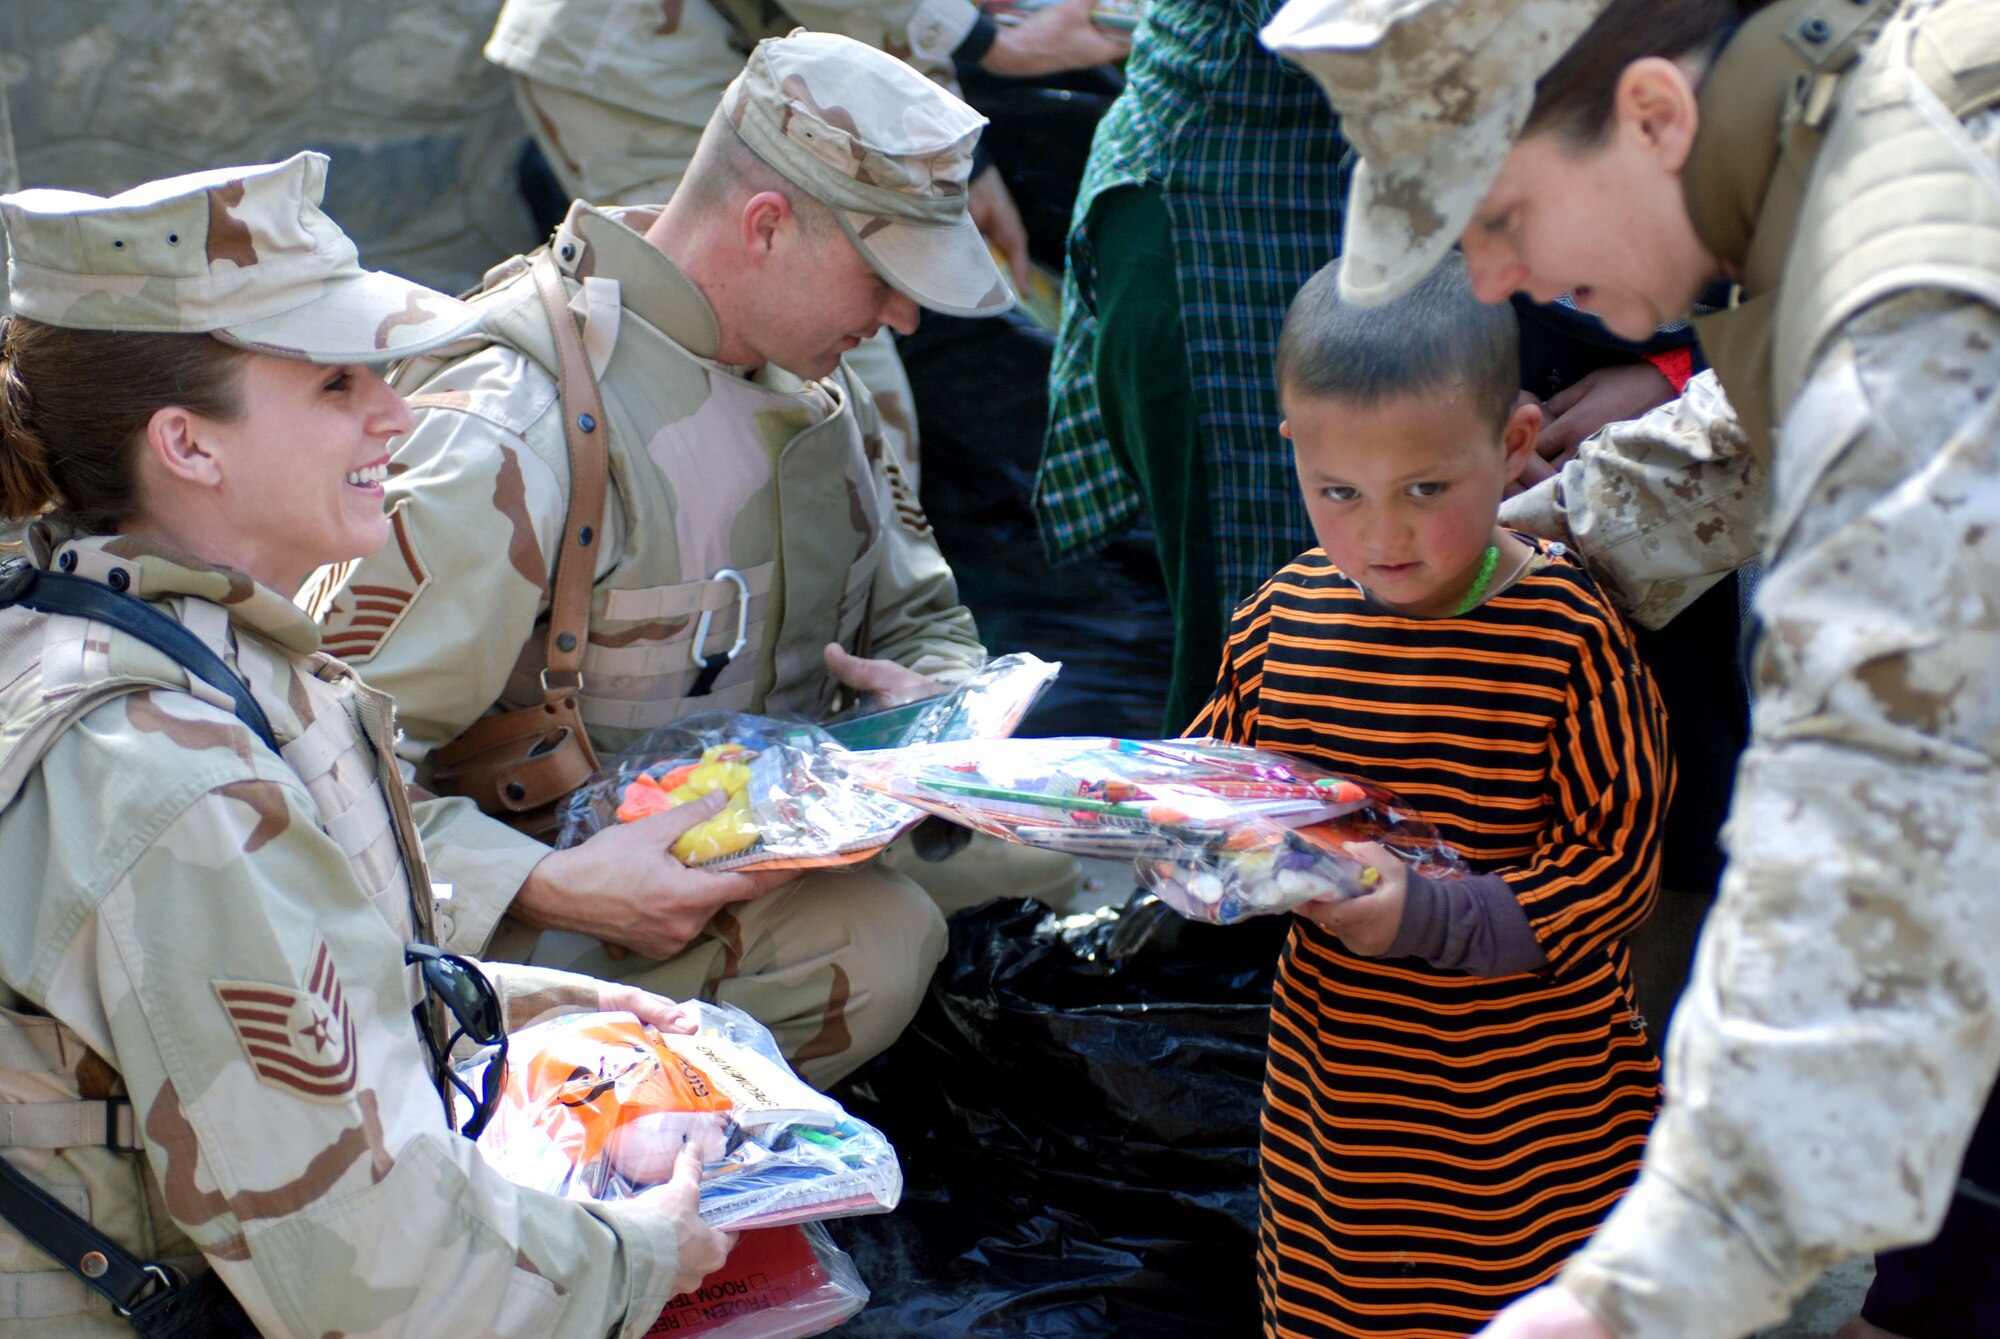 Tech. Sgt. Shelly Ward (from left), Master Sgt. Shane Enos and Marine Maj. Shawn Haney distribute school supplies to children March 8 at a school in downtown Kabul, Afghanistan. The team from the Combined Security Transition Command were part of a volunteer community relations event. (U.S. Air Force photo/Senior Airman Stacia Zachary)